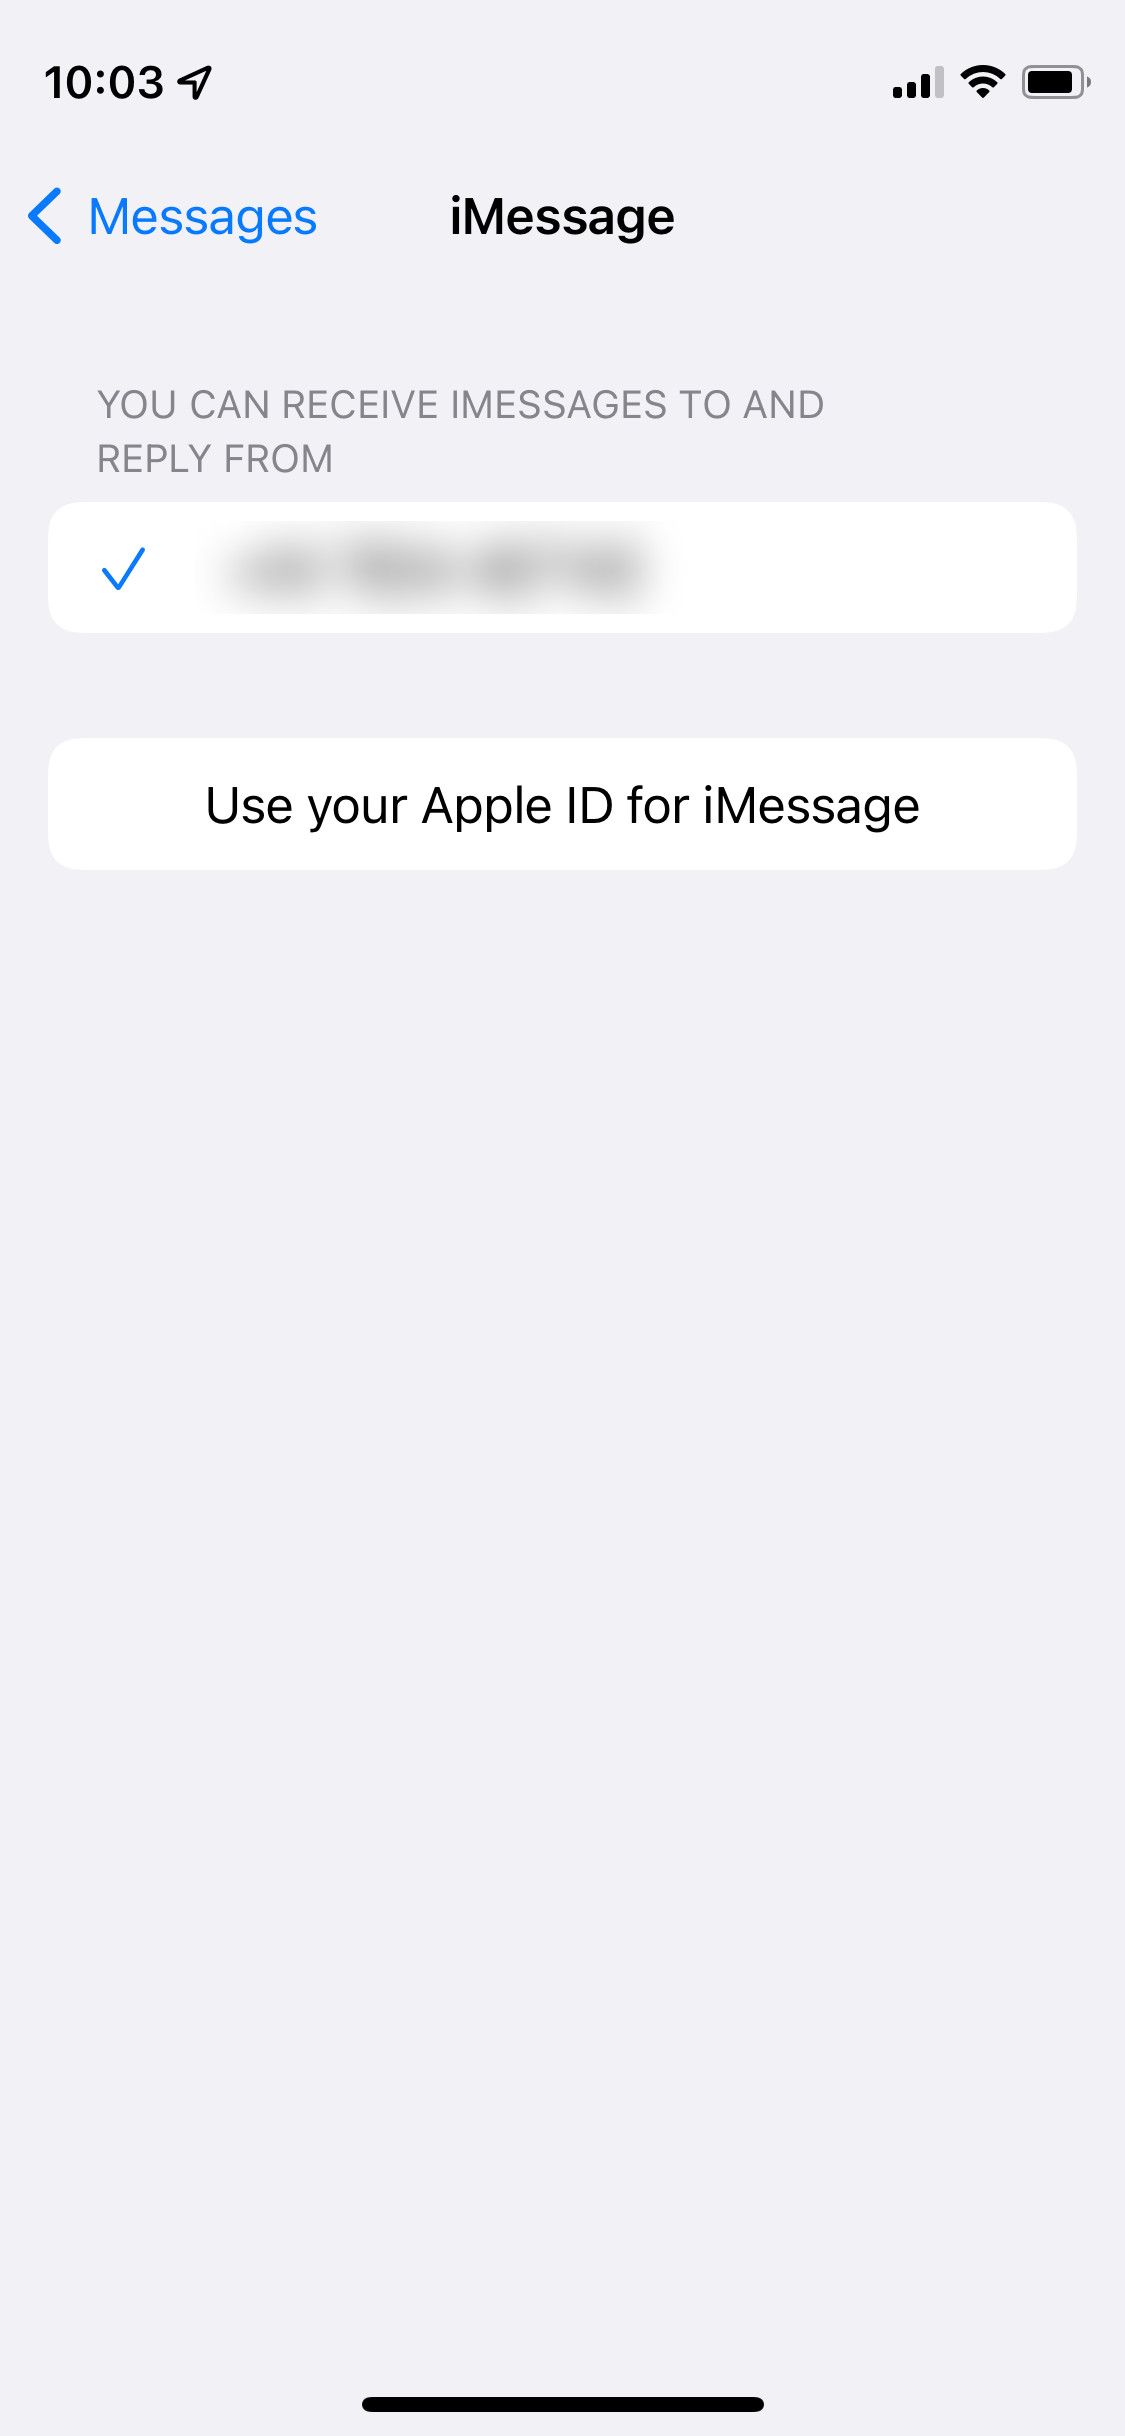 Use your Apple ID for iMessage option on iPhone